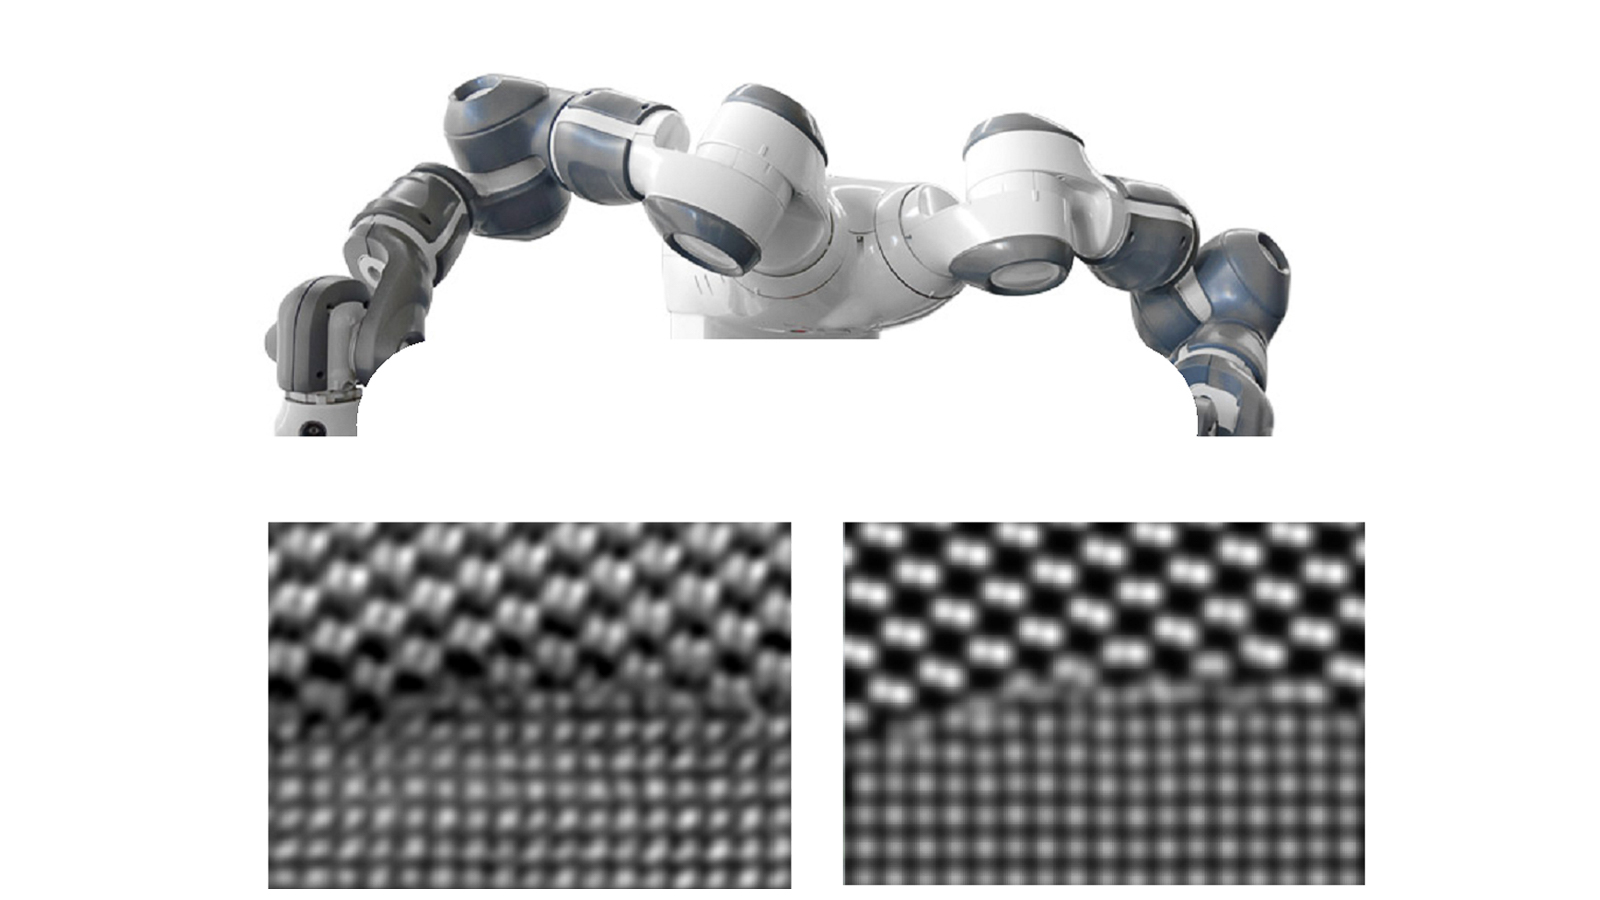 FANTASTX will use computer vision tools to compare experimental (bottom left) and simulated (bottom right) electron microscopy images to understand materials at the atomic level. (Image by Jingling Guo and Robert Klie, University of Illinois at Chicago, and Eric Schwenker, Northwestern University.)